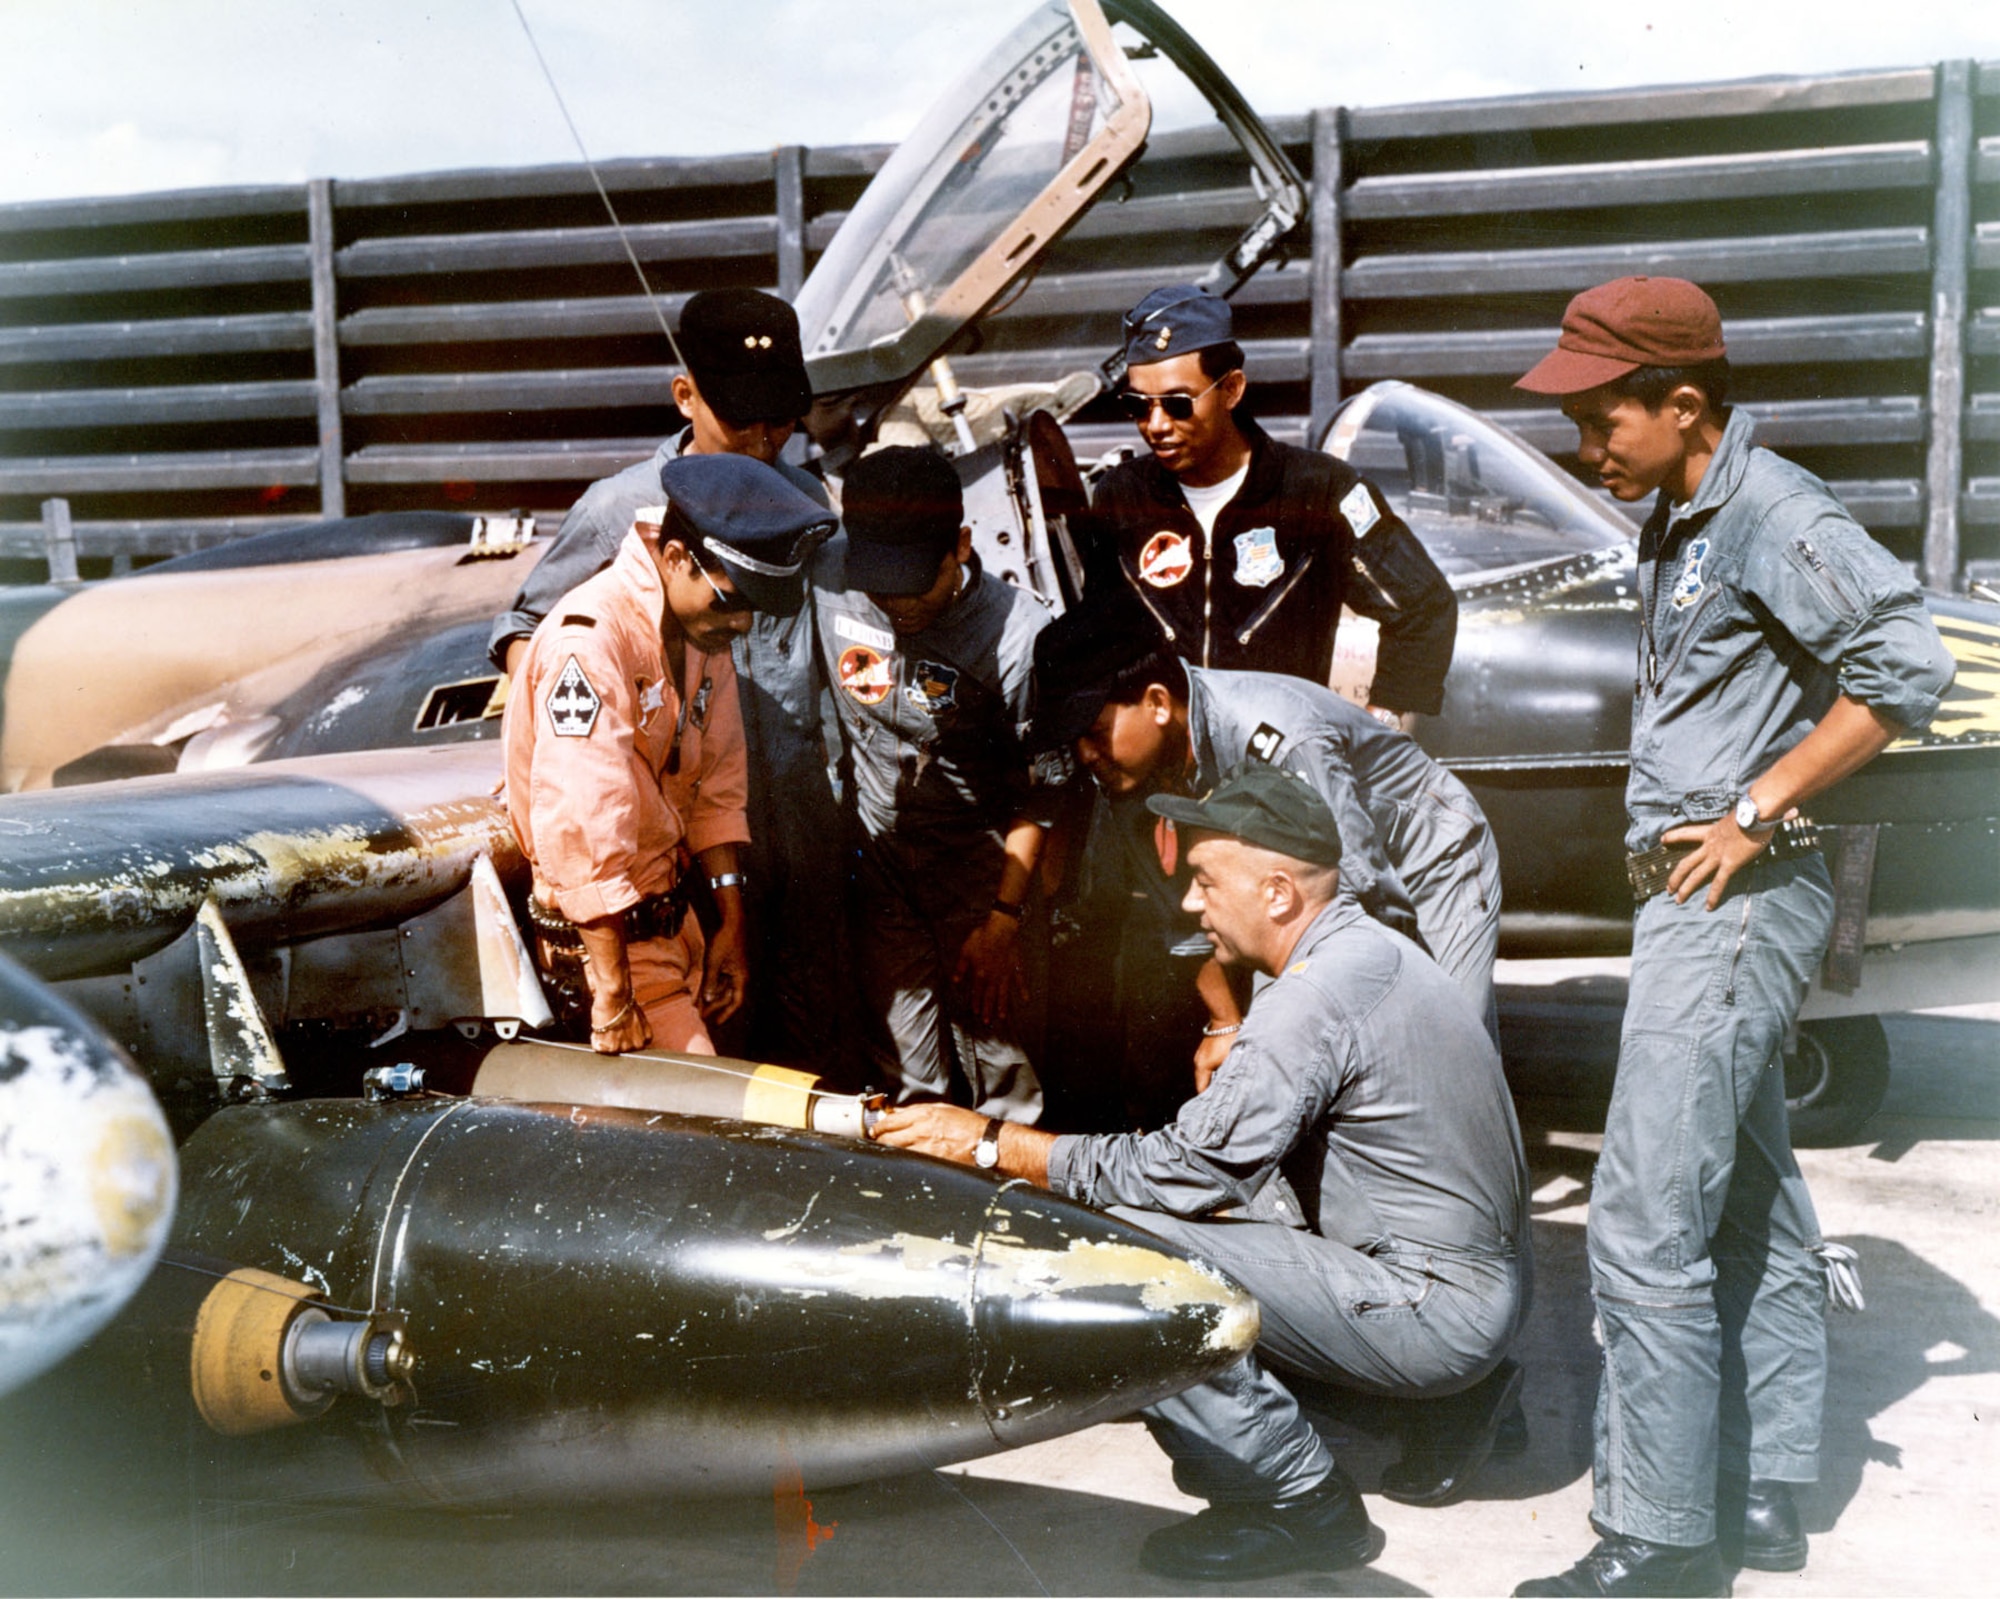 South Vietnamese pilots learn from an American instructor. (U.S. Air Force photo)